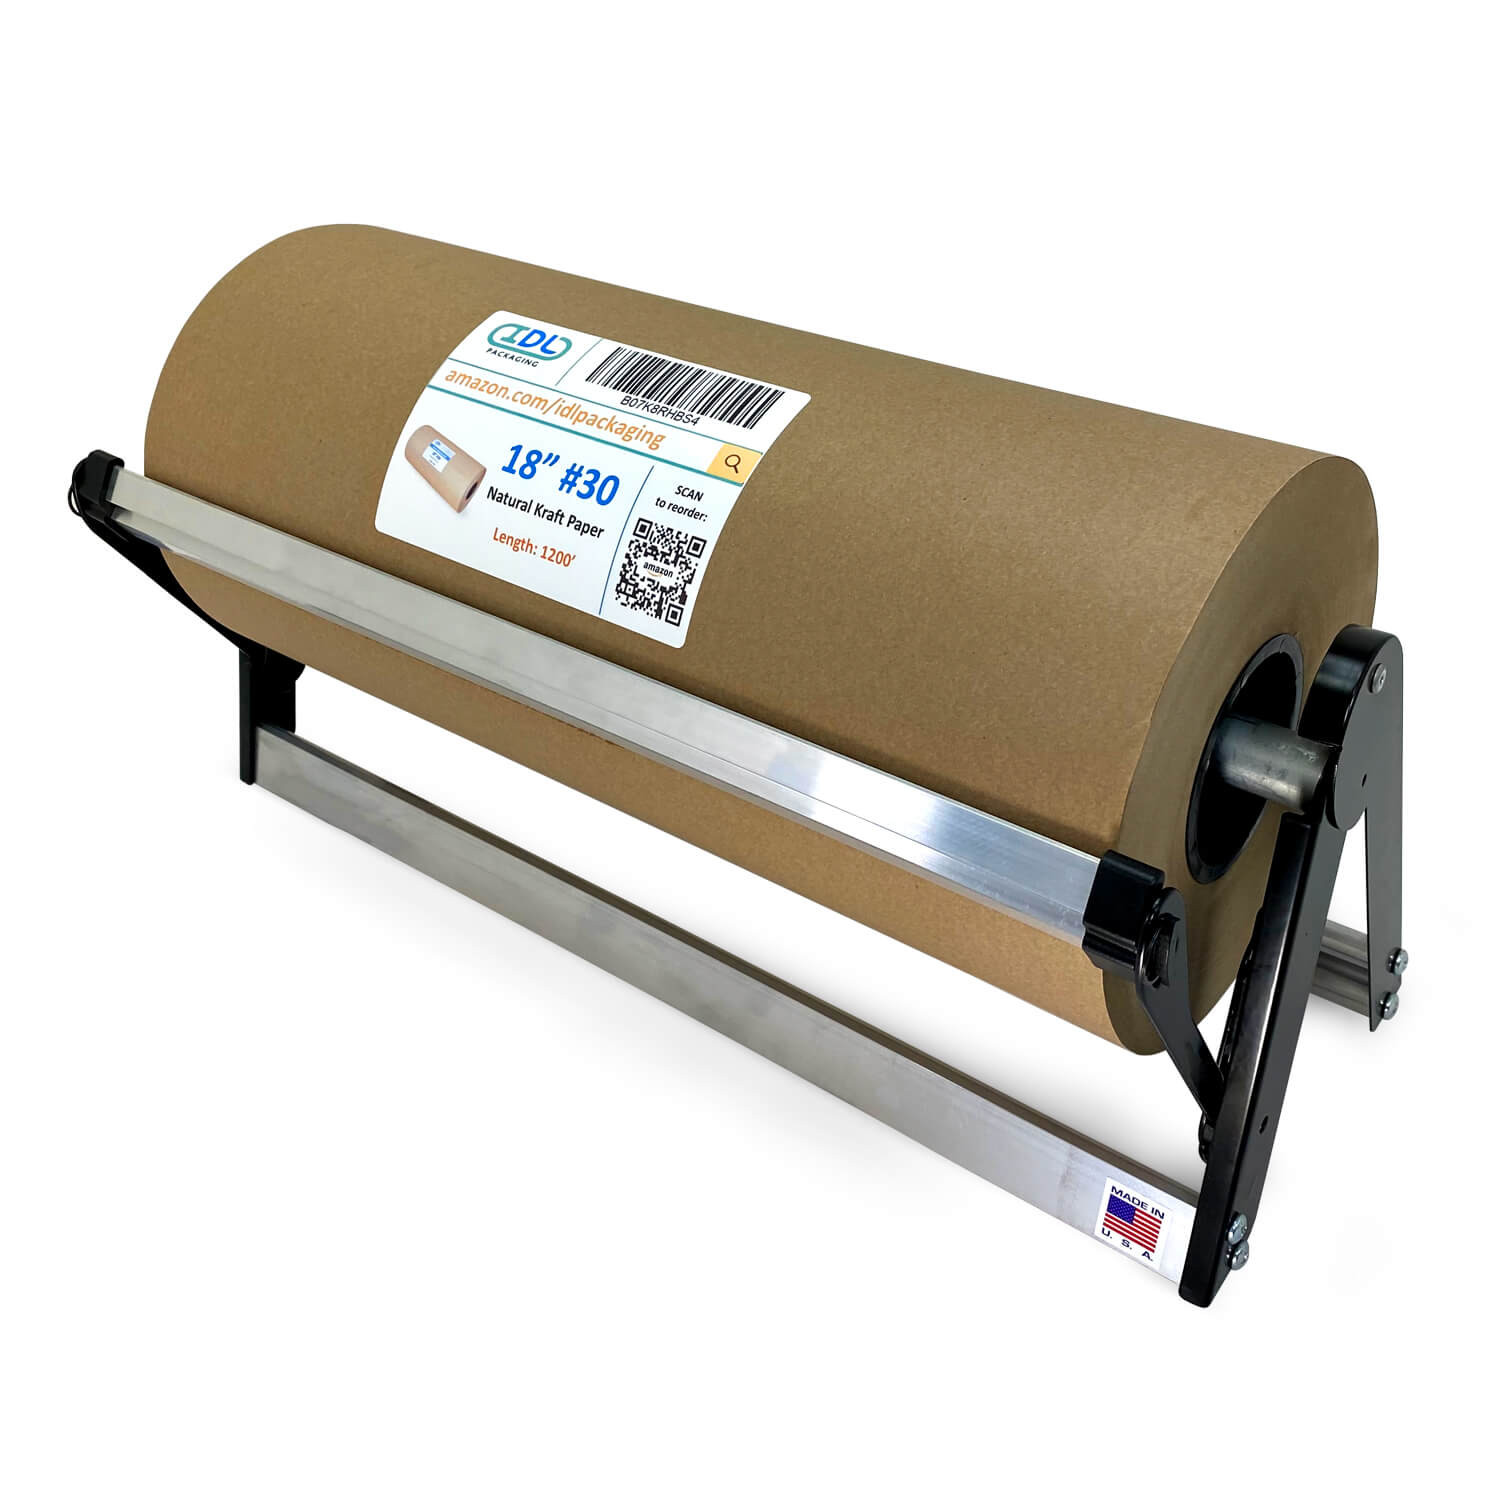 Butcher Paper Cutter 18W Stainless Steel